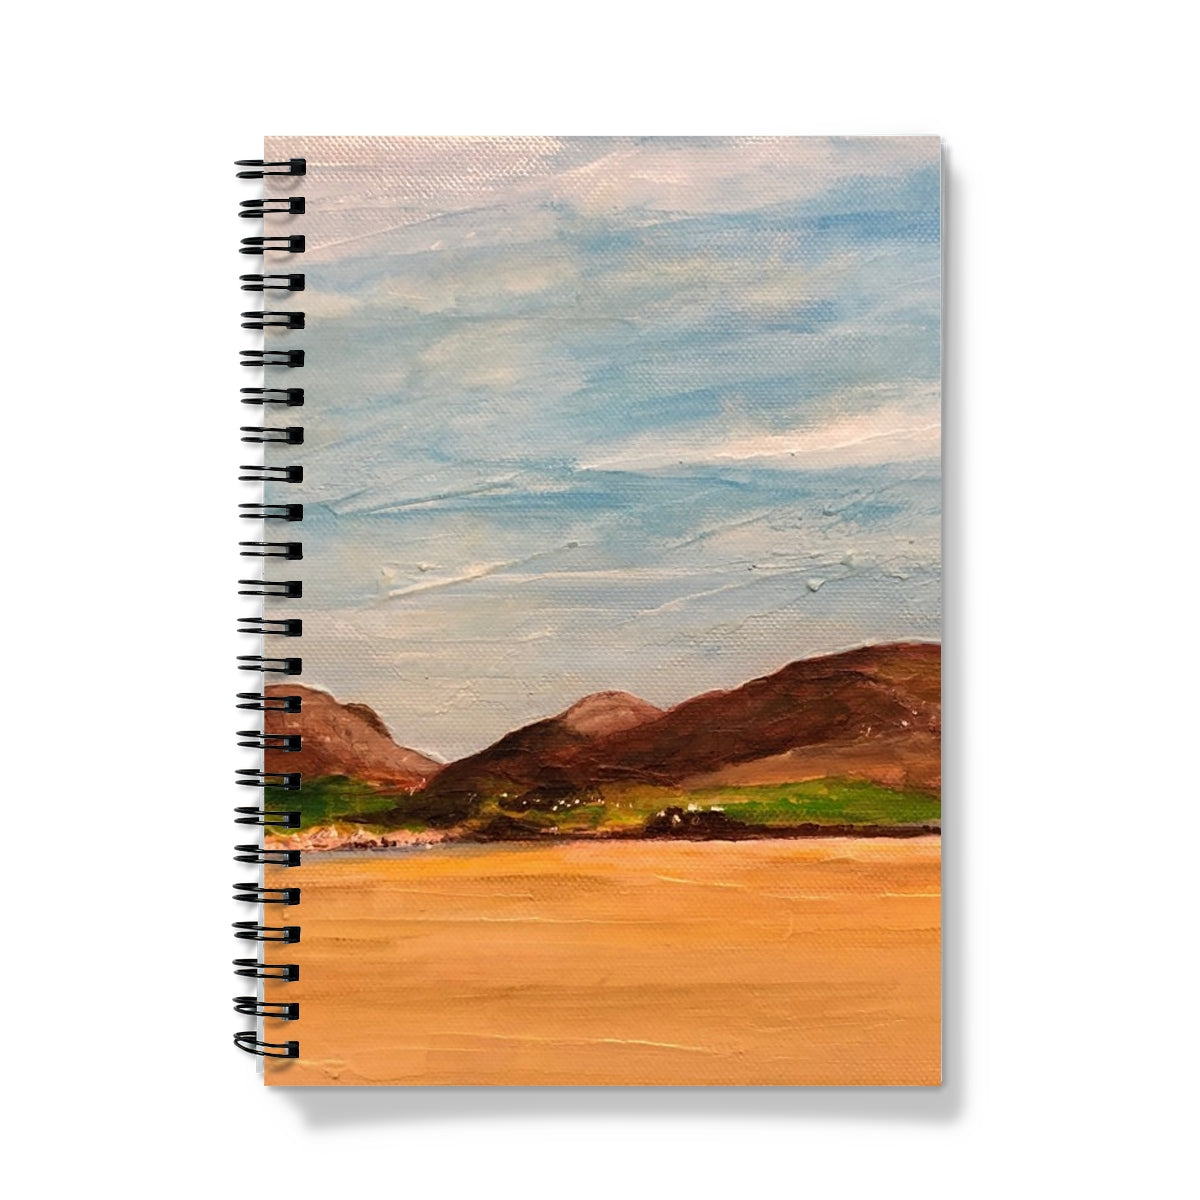 Uig Sands Lewis Art Gifts Notebook-Journals & Notebooks-Hebridean Islands Art Gallery-A4-Lined-Paintings, Prints, Homeware, Art Gifts From Scotland By Scottish Artist Kevin Hunter